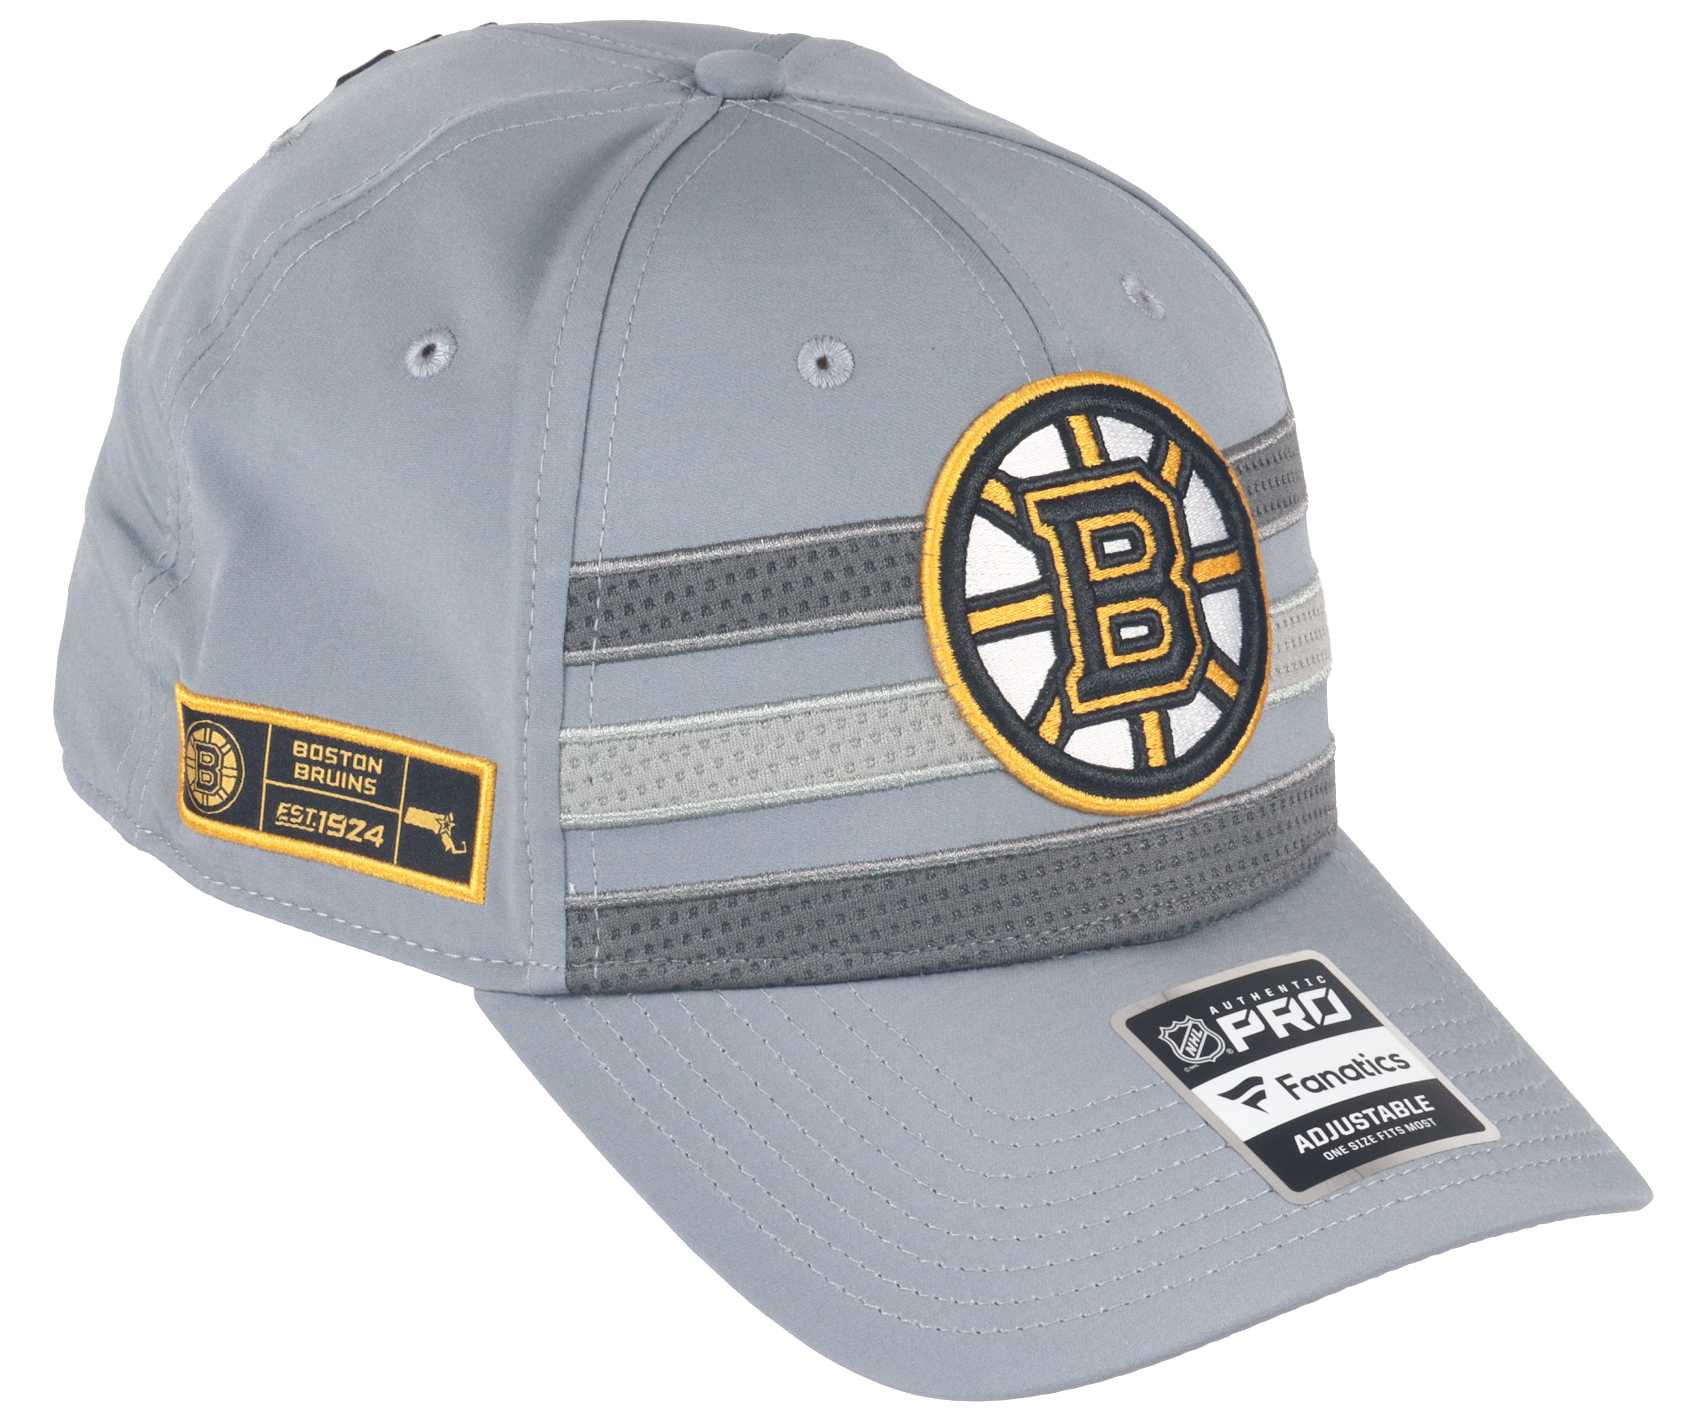 Boston Bruins NHL Authentic Pro Home Ice Structured Curved Snapback Cap Grey Fanatics